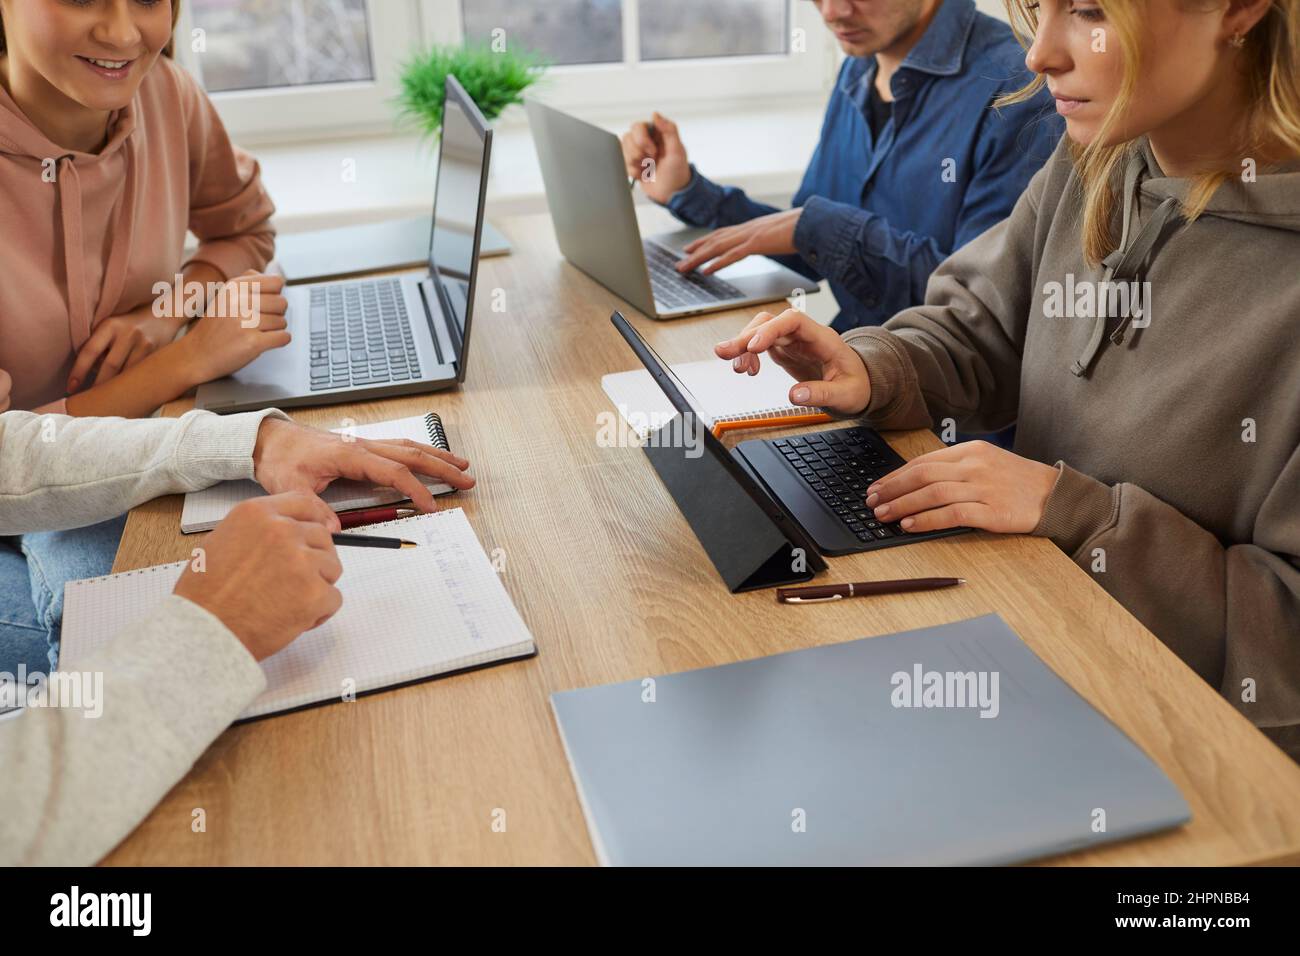 Group of university students sitting at desk, using laptops and tablets and sharing study notes Stock Photo